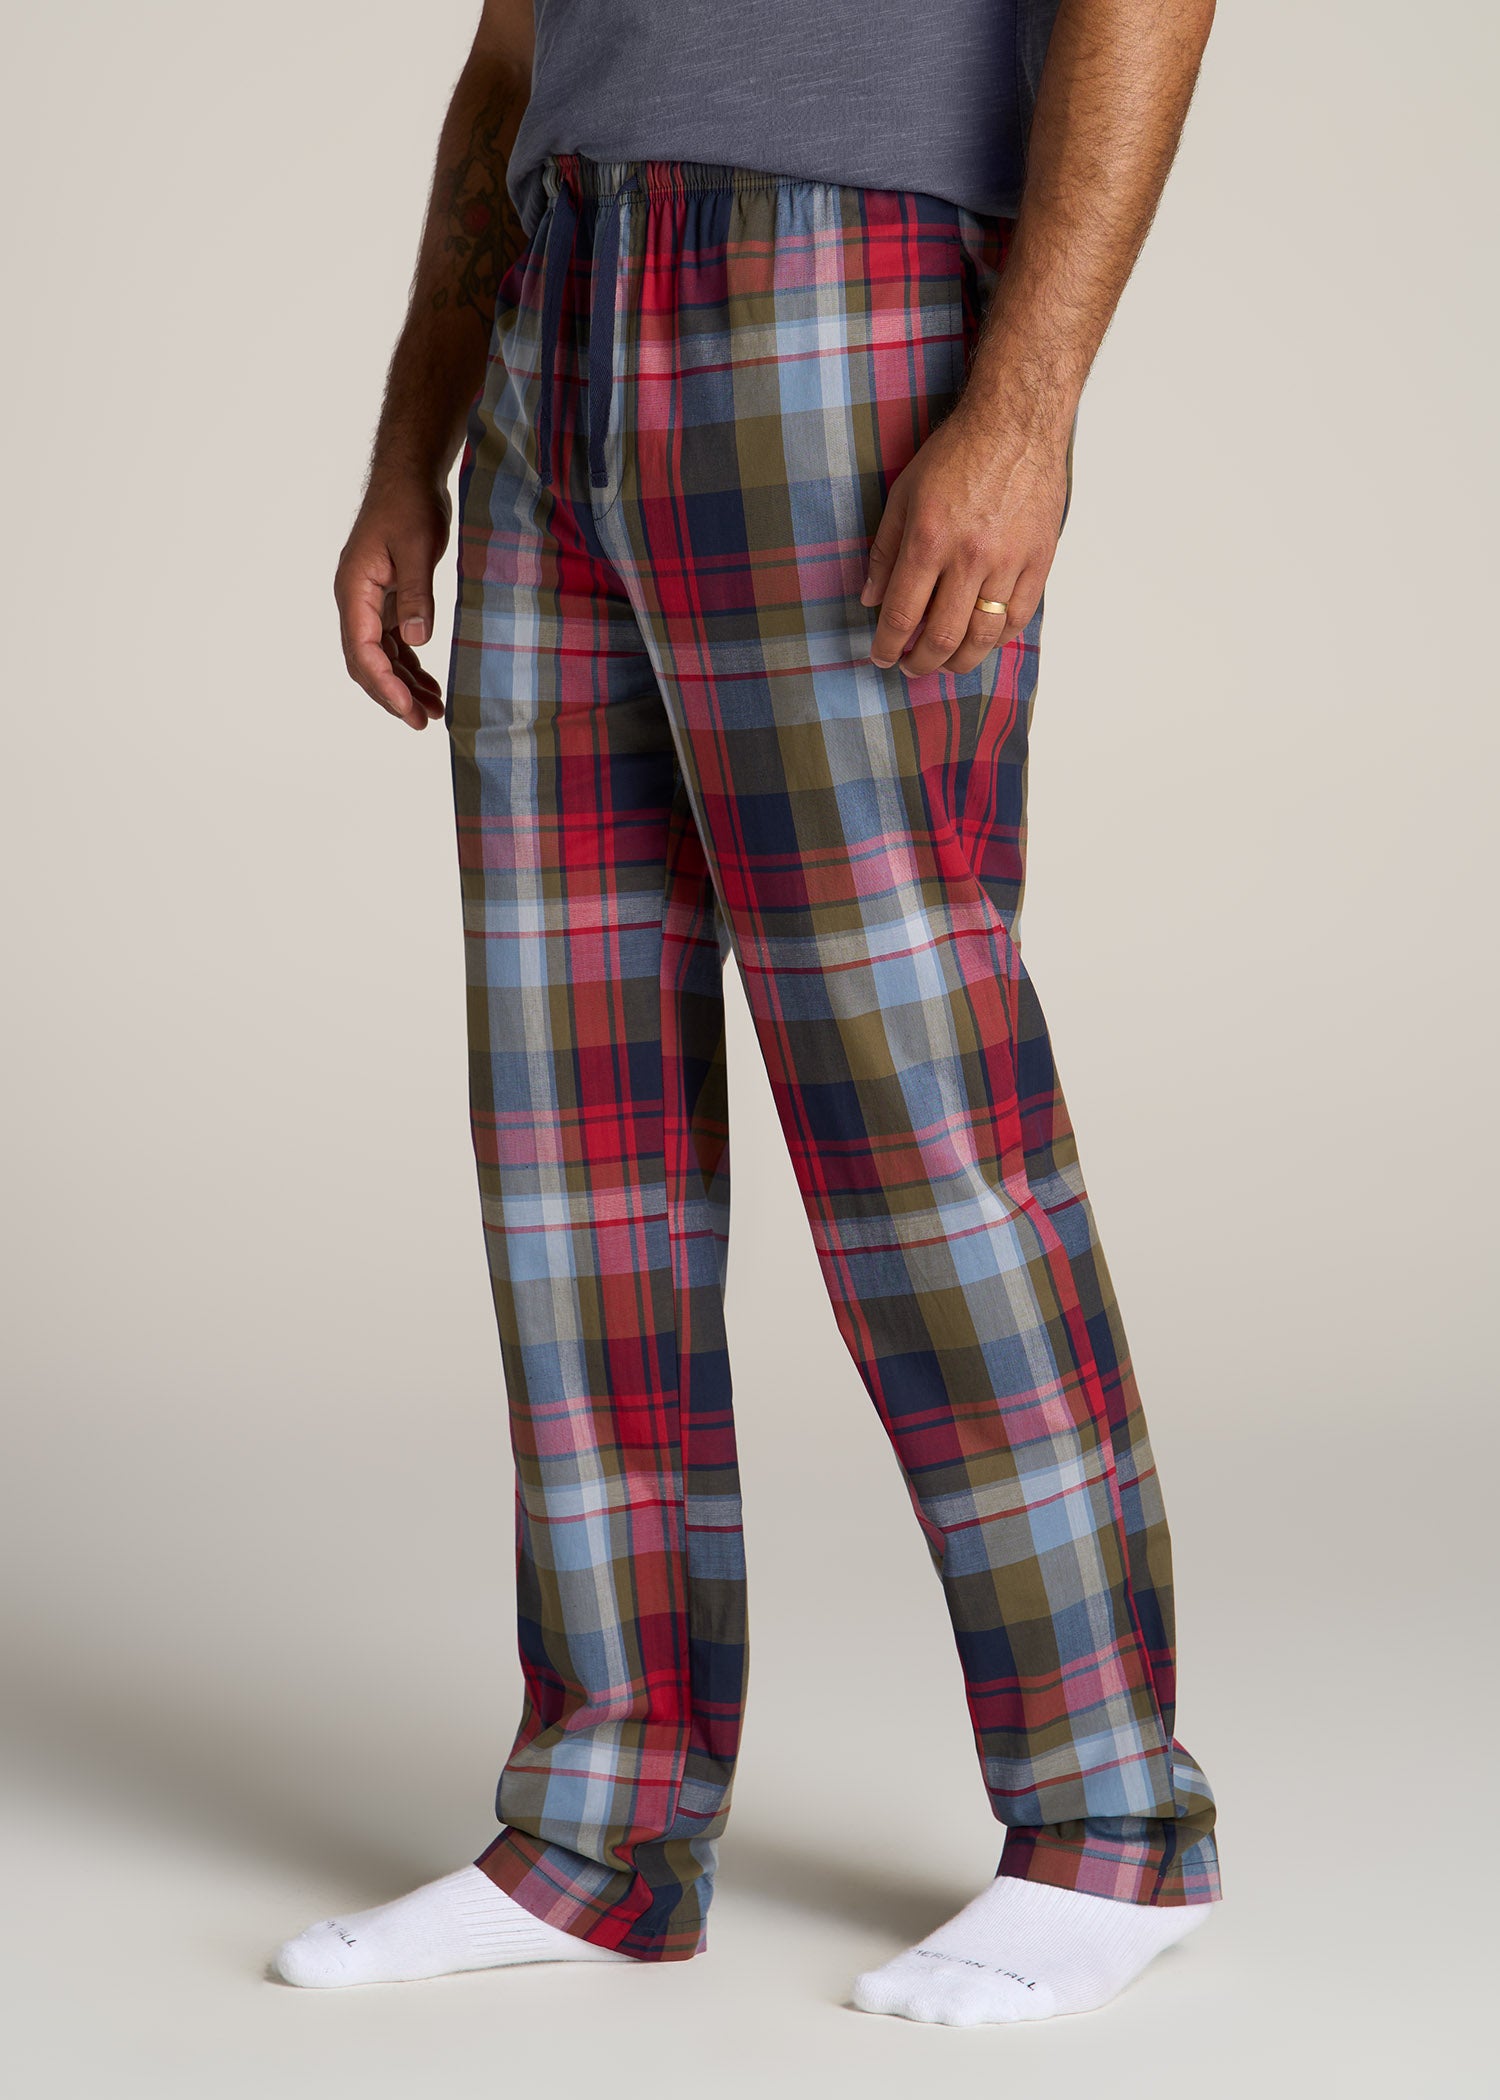 Essentials Men's Straight-Fit Woven Pajama Pant, Navy Gingham, Small  : : Clothing, Shoes & Accessories